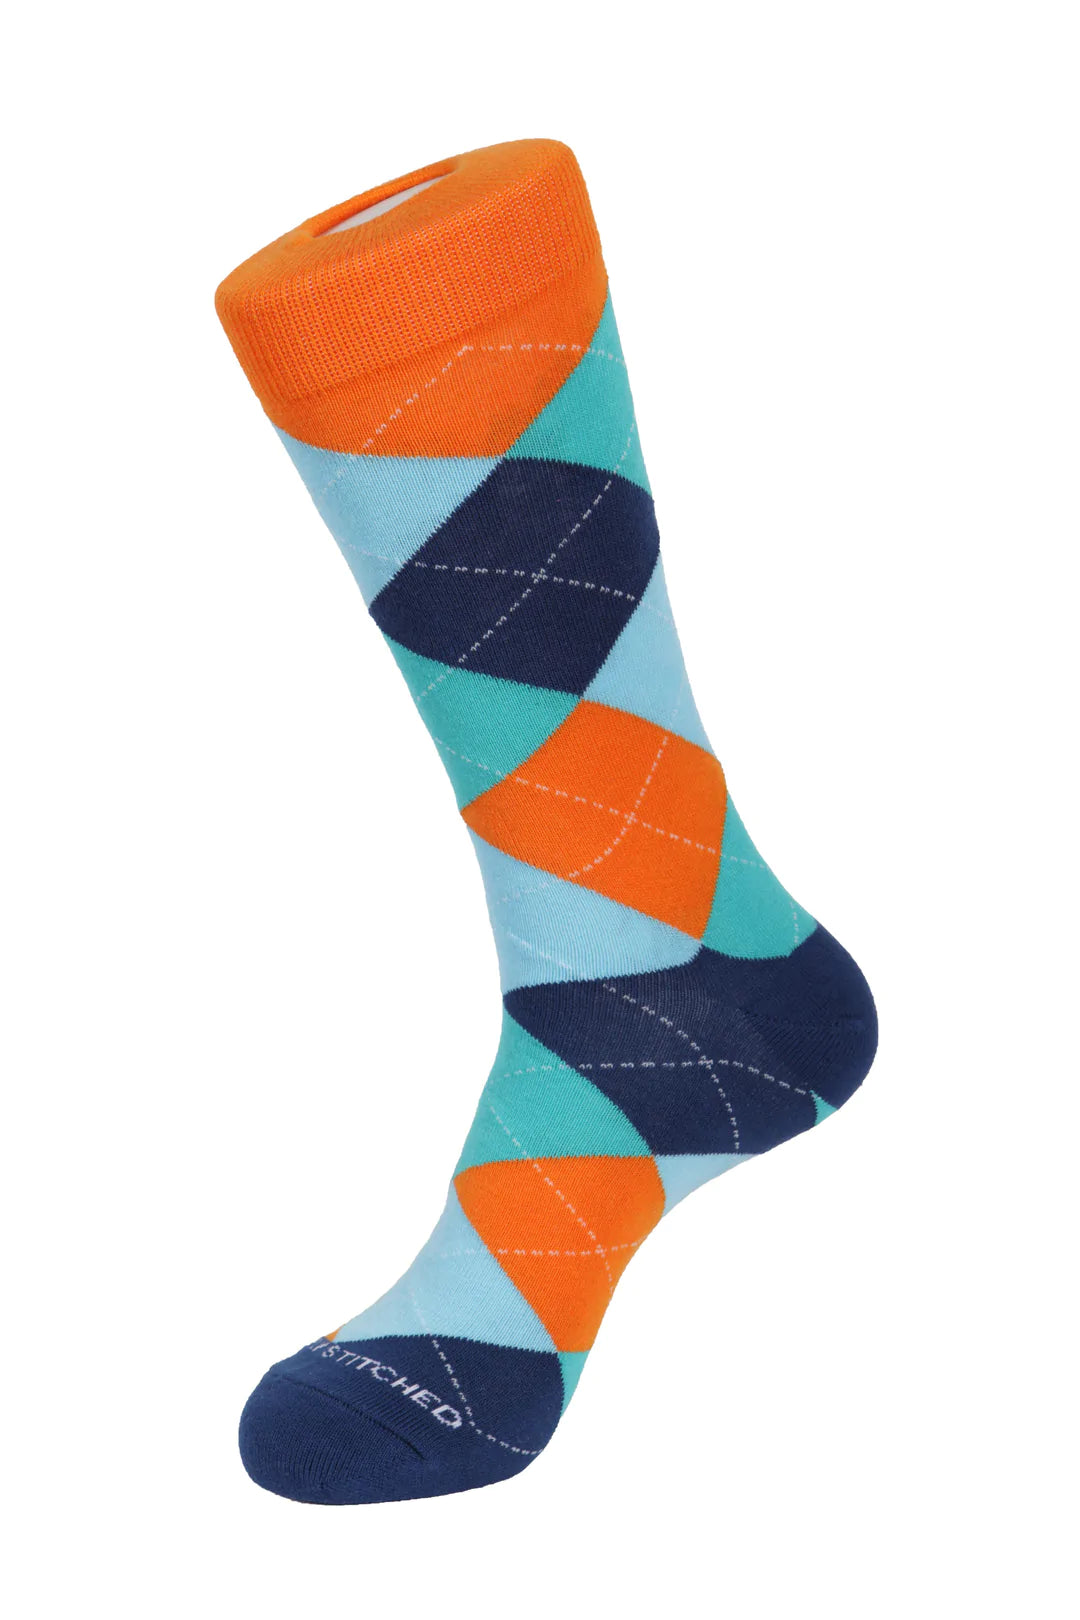 Unsimply Stitched socks with orange and aqua geometric shapes, making it a great pairing with DFR89 blue denim jeans and a fun Sugar sport shirt.